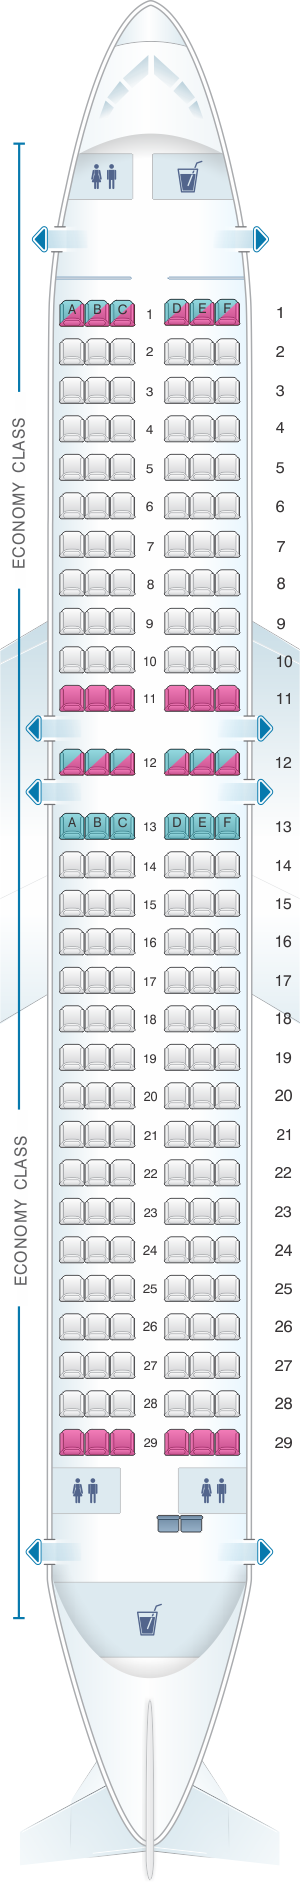 Seat map for White Airways Airbus A320